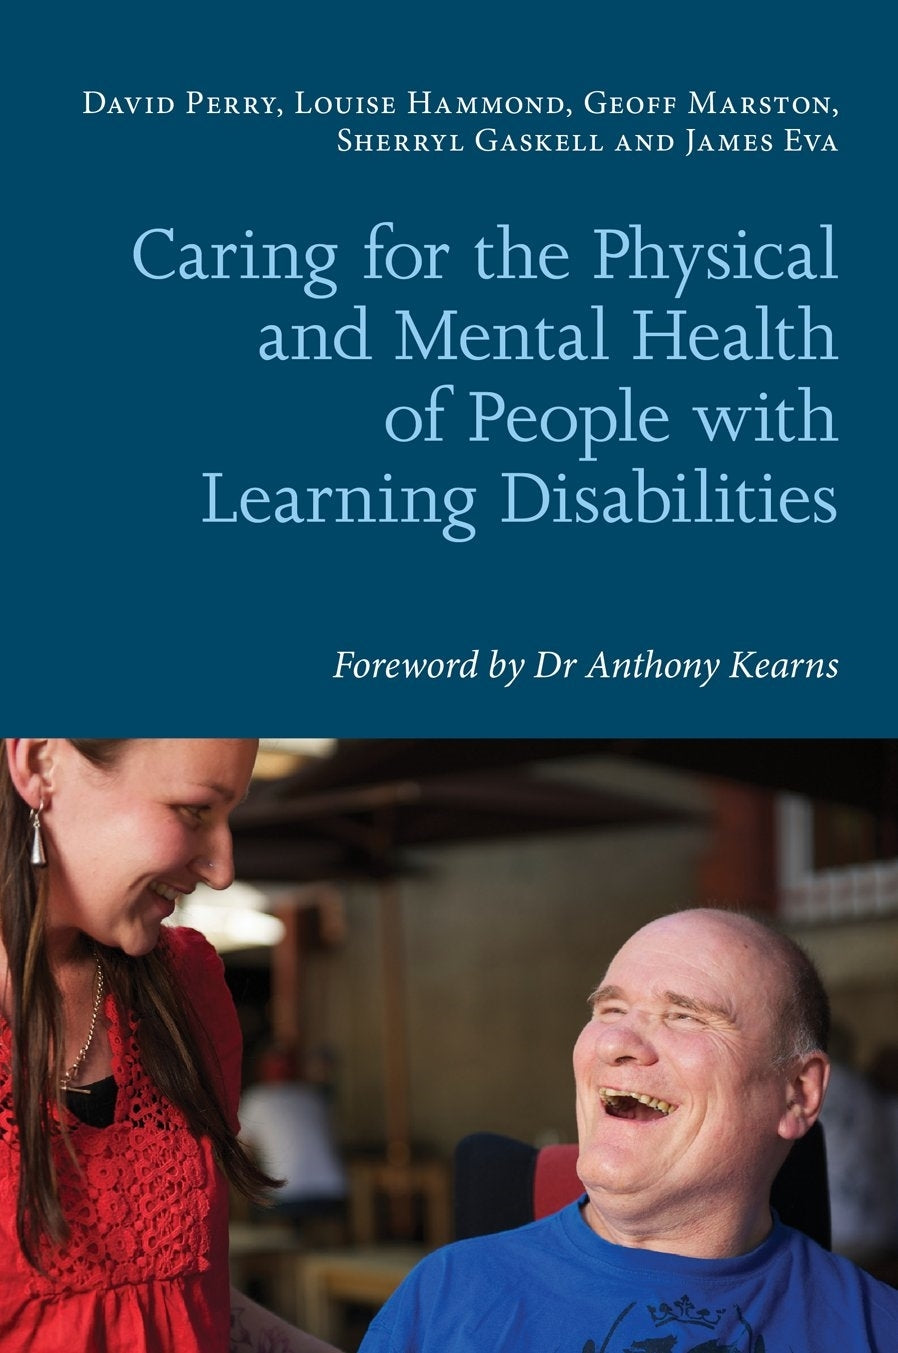 Caring for the Physical and Mental Health of People with Learning Disabilities by Elin Davis, Anthony Kearns, David Perry, Louise Hammond, Geoff Marston, James Eva, Sherryl Gaskell